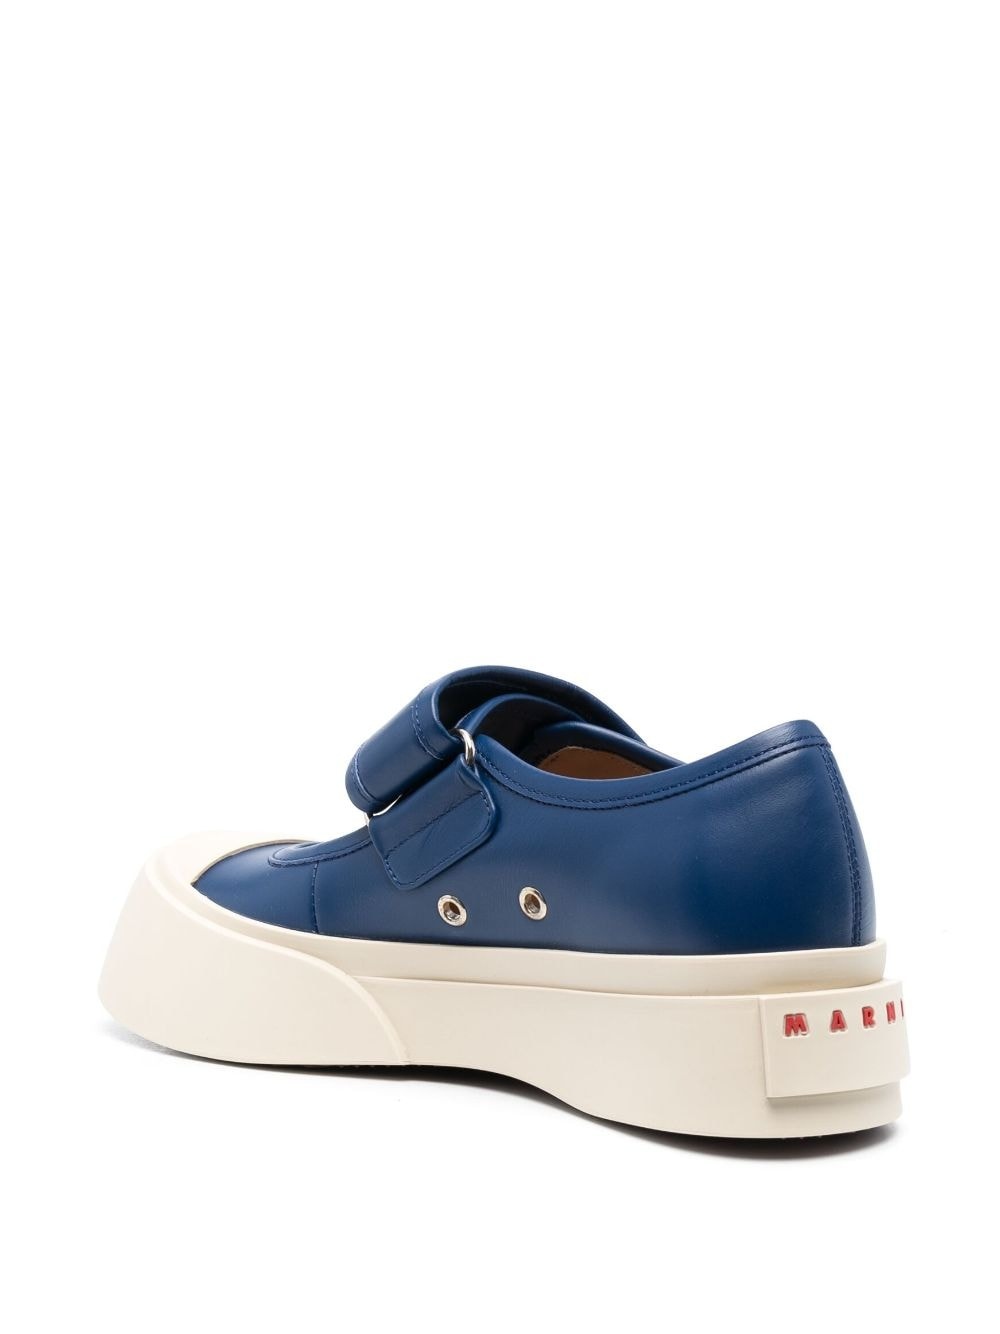 Pablo Mary Jane leather sneakers - 3